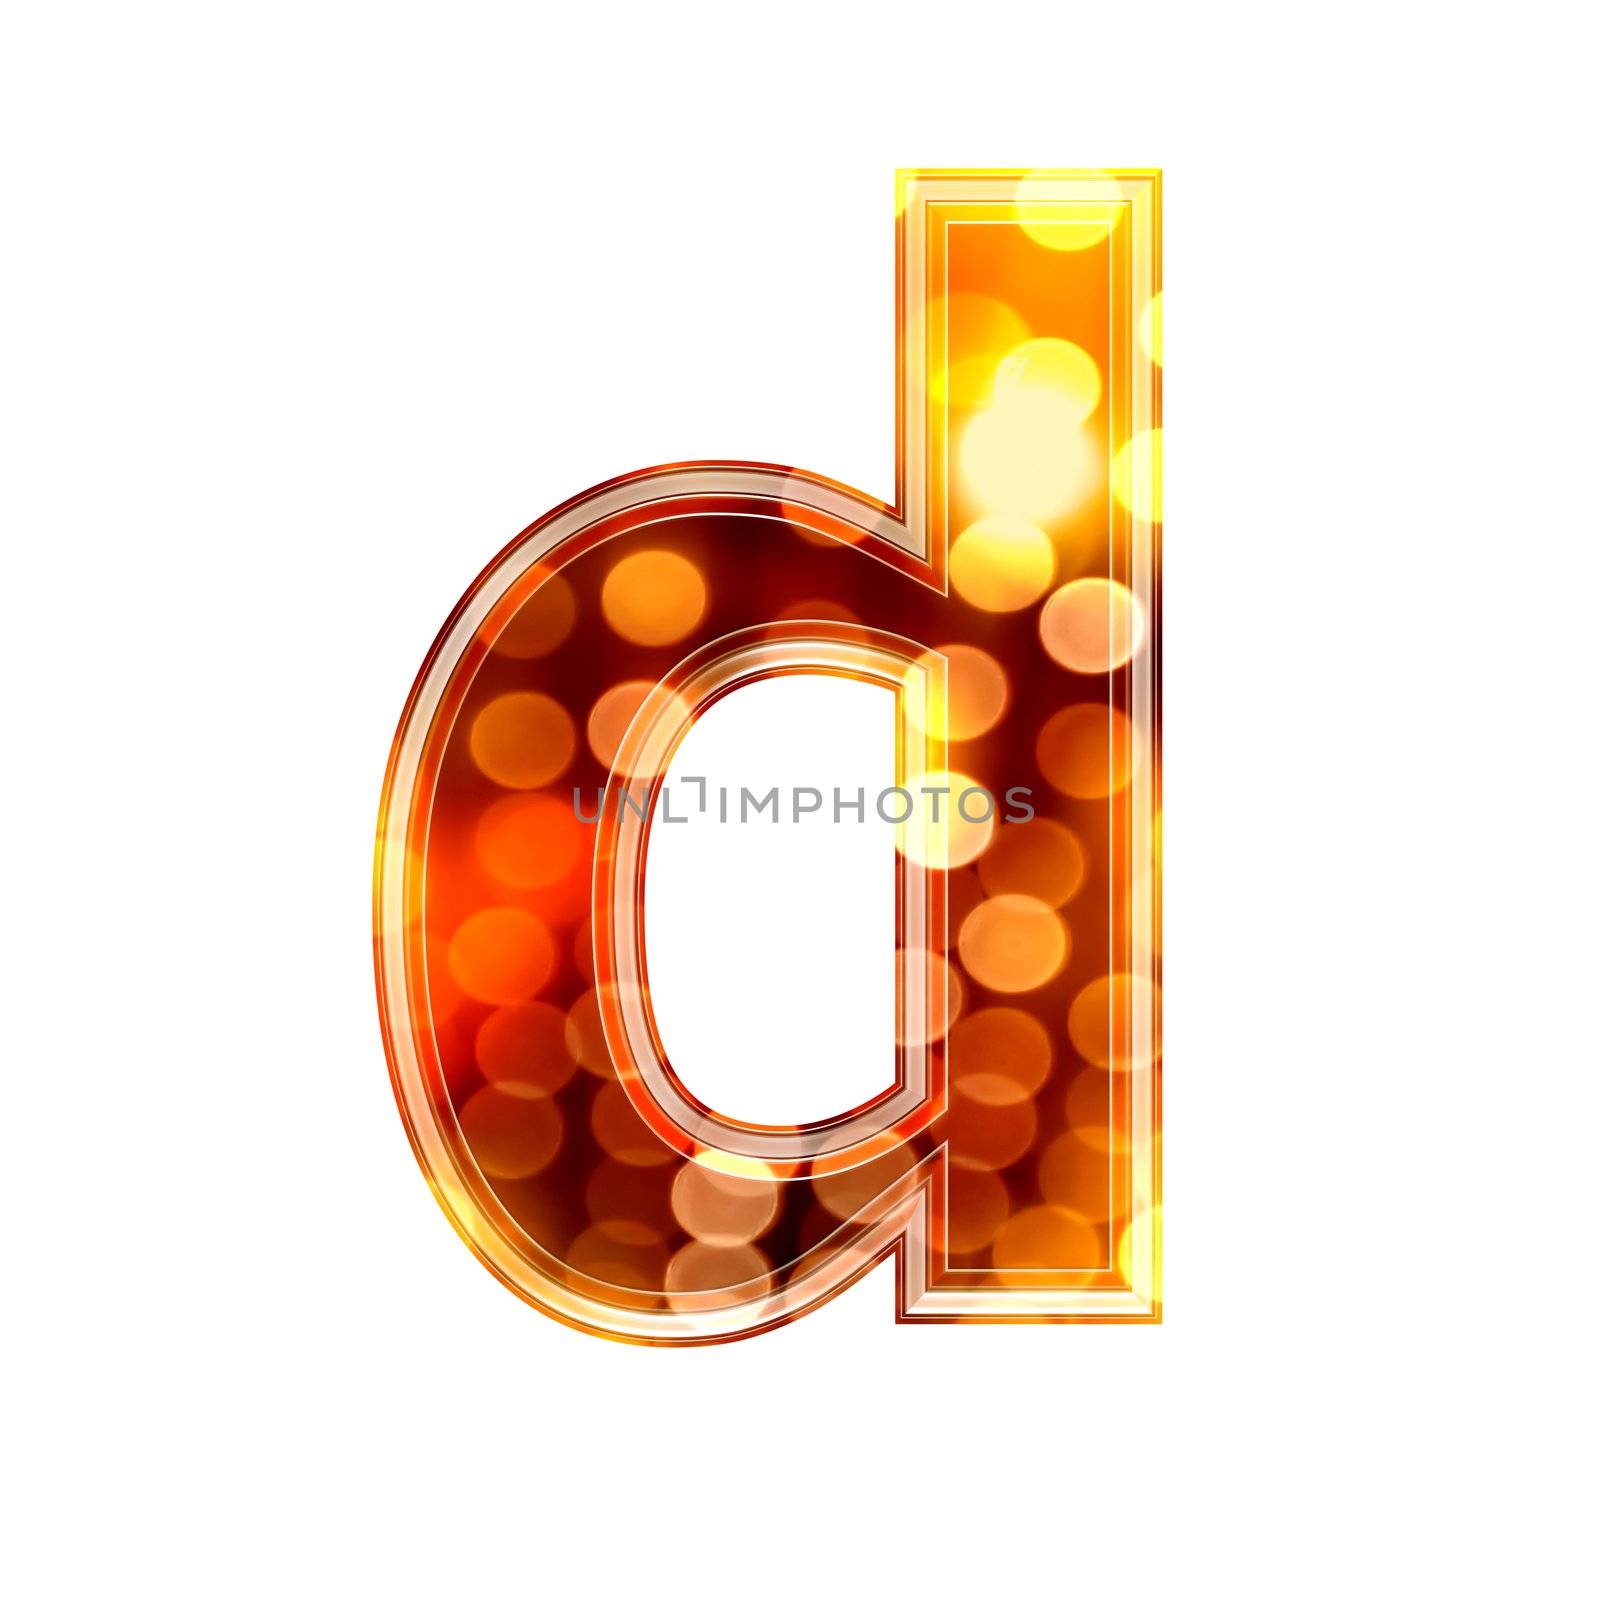 3d letter with glowing lights texture - d